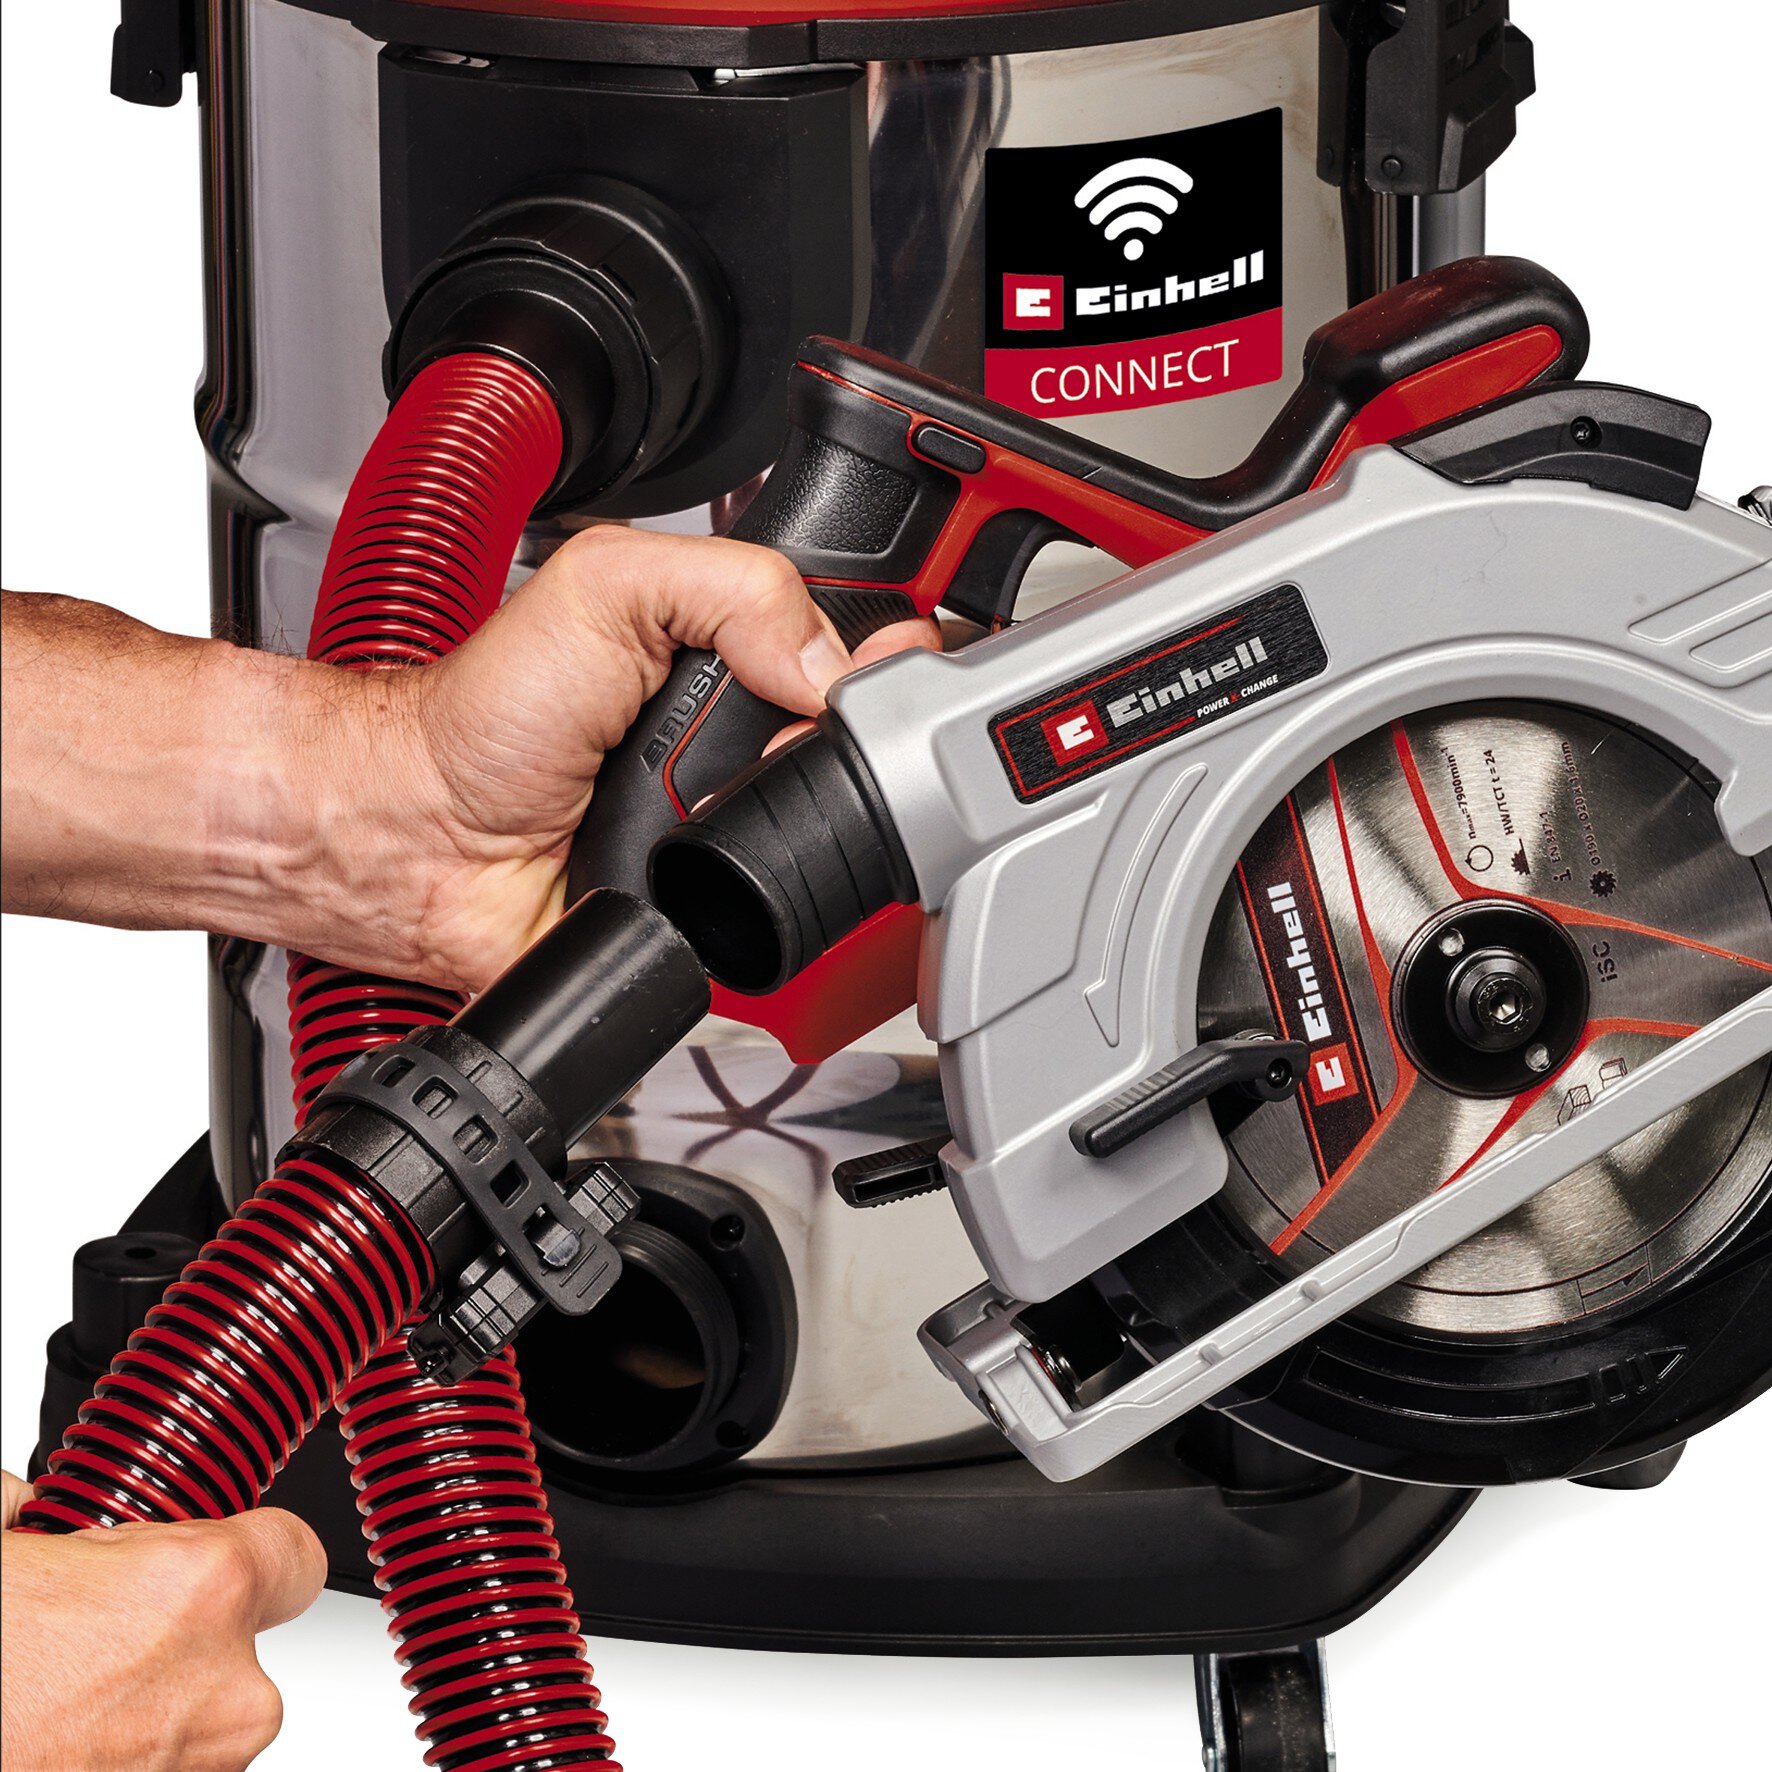 einhell-professional-cordl-wet-dry-vacuum-cleaner-2347143-detail_image-002